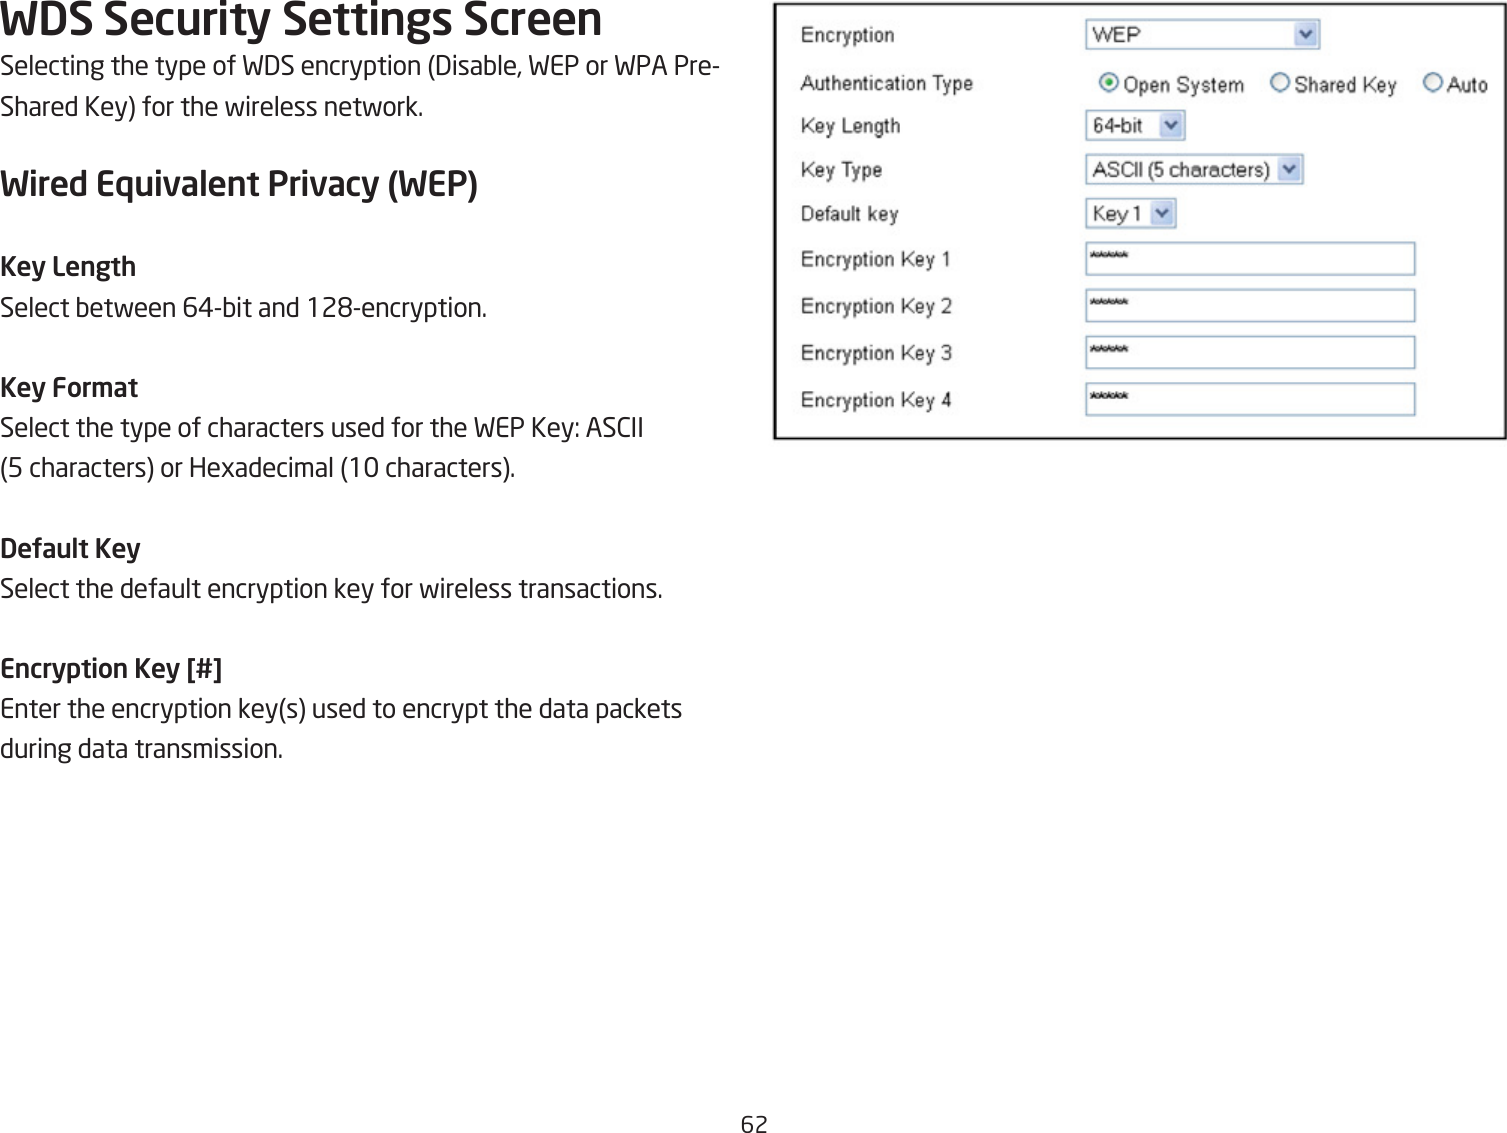 62WDS Security Settings ScreenSelecting the type of F3S encryption 3isaQle, FEP or FPA PreShared Key for the fireless netfork.Wired Equivalent Privacy (WEP)Key LengthSelect Qetfeen 6#Qit and 12&apos;encryption.Key For\atSelect the type of characters used for the FEP Key: AS2II5 characters or Hegadecimal 1 characters.DeUault KeySelect the default encryption key for fireless transactions.Encryption Key [#]Enter the encryption keys used to encrypt the data packetsduring data transmission.